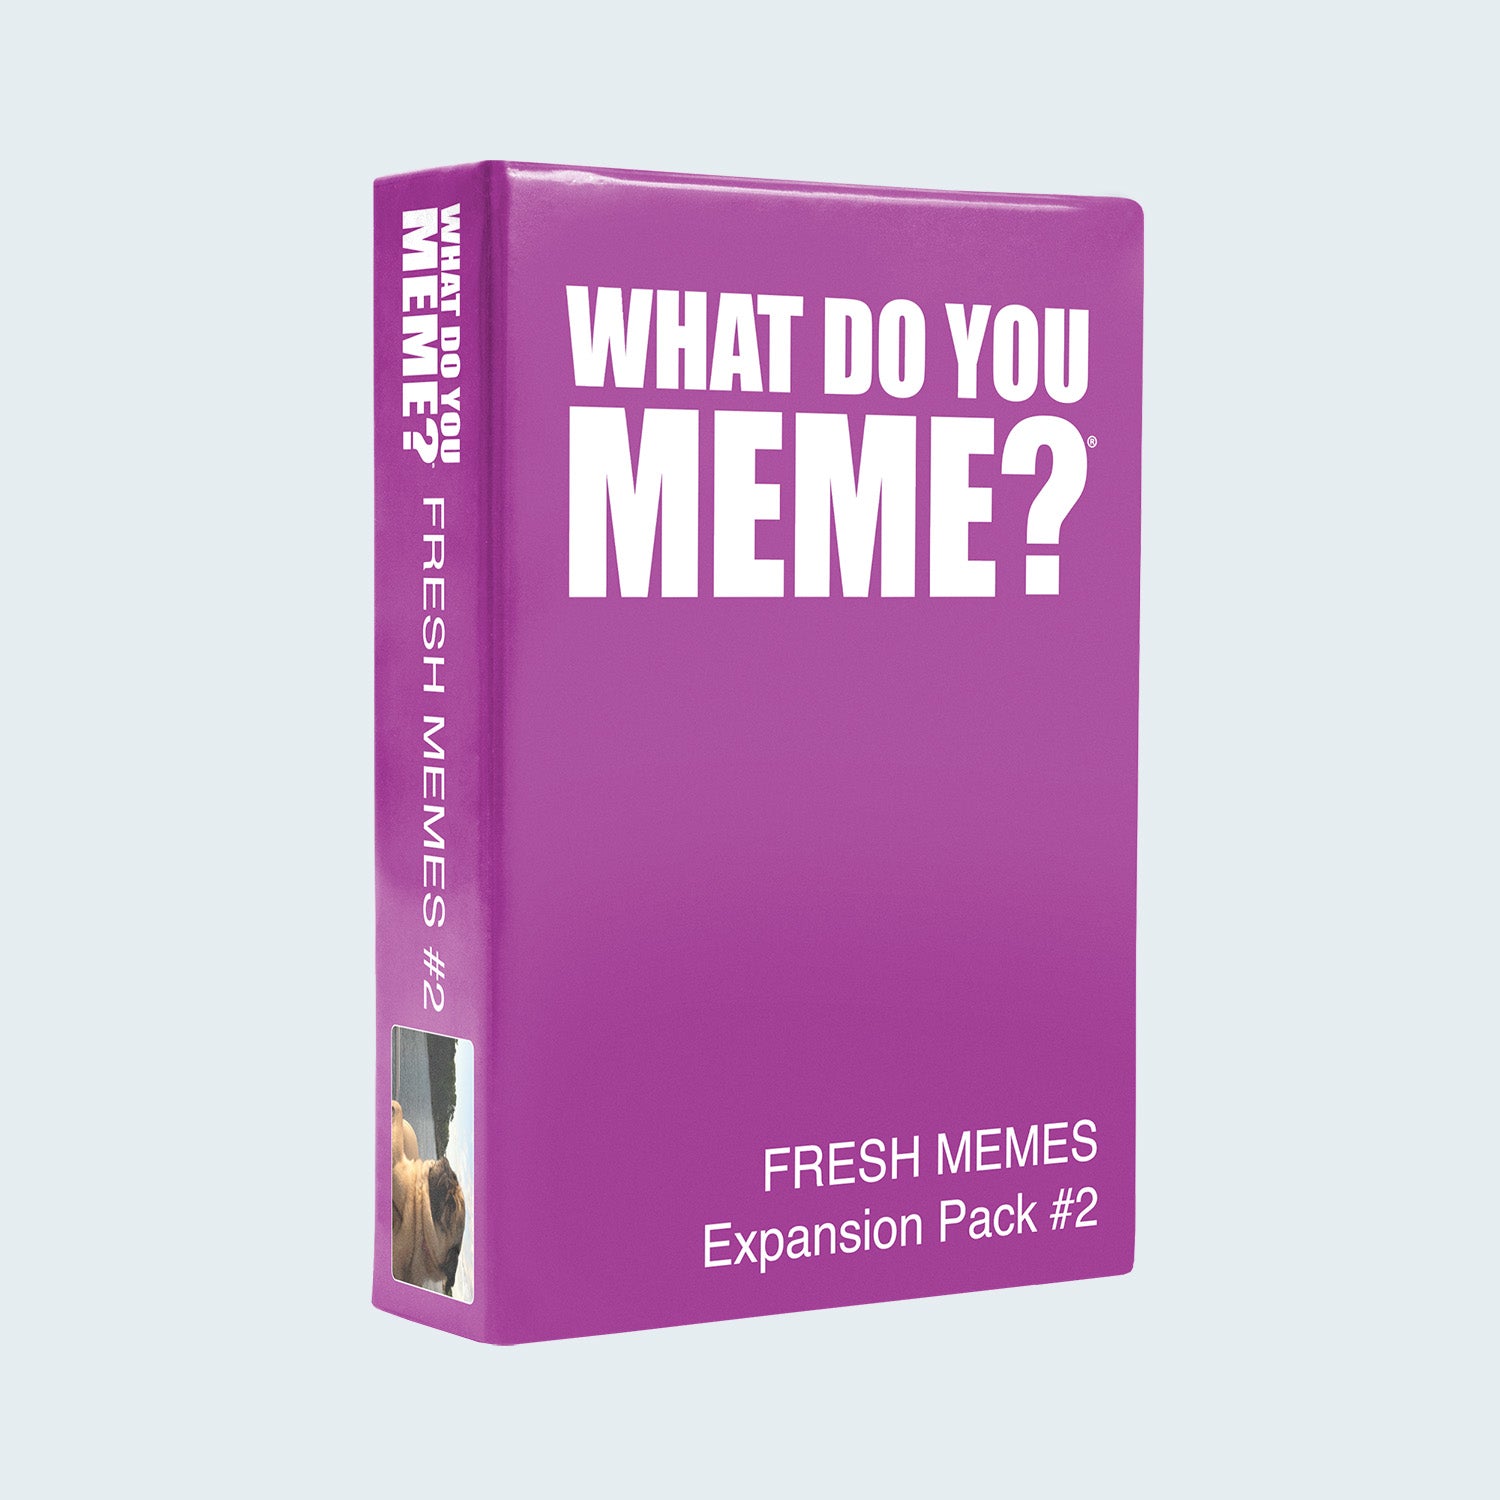 fresh-memes-2-expansion-pack-game-box-and-game-play-01-what-do-you-meme-by-relatable